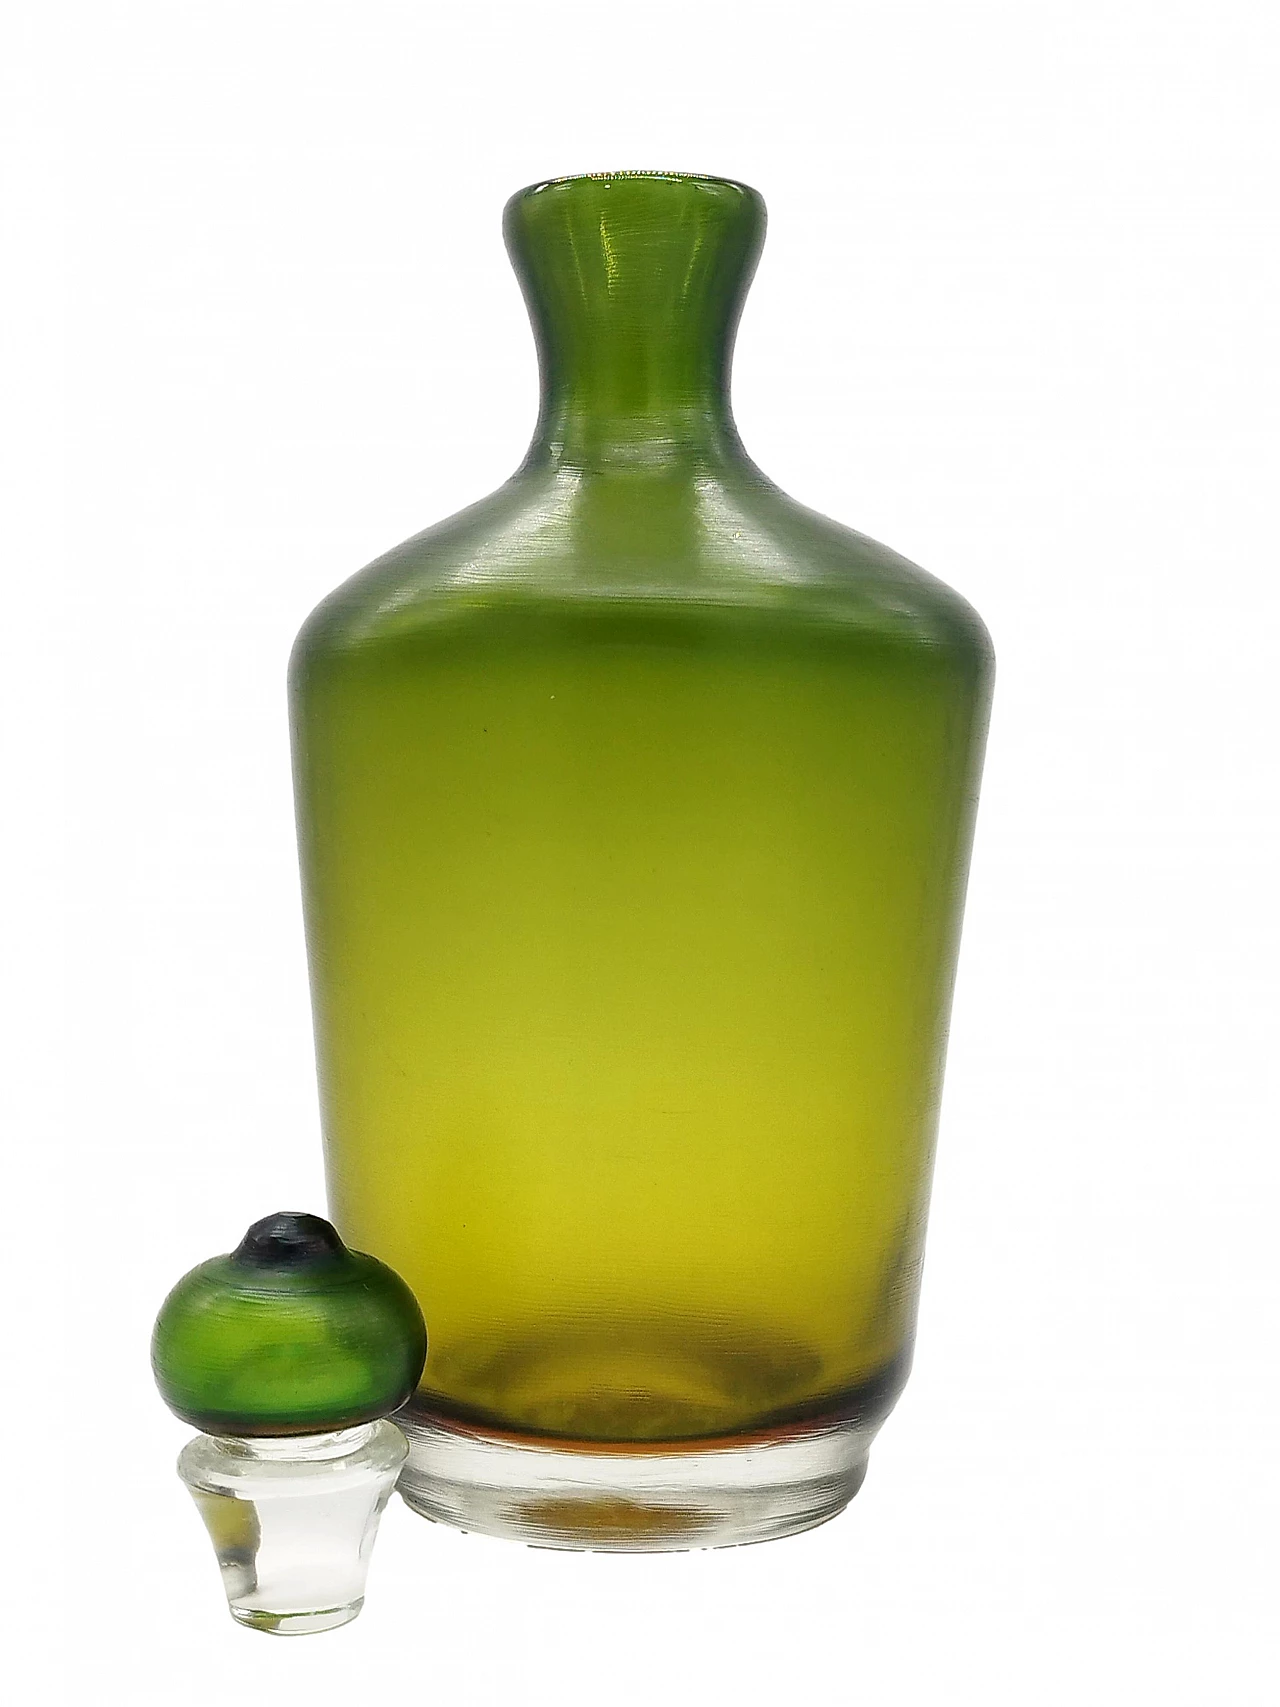 Green Murano glass bottle with stopper from the Bottiglie Incise series by Paolo Venini, 1985 2